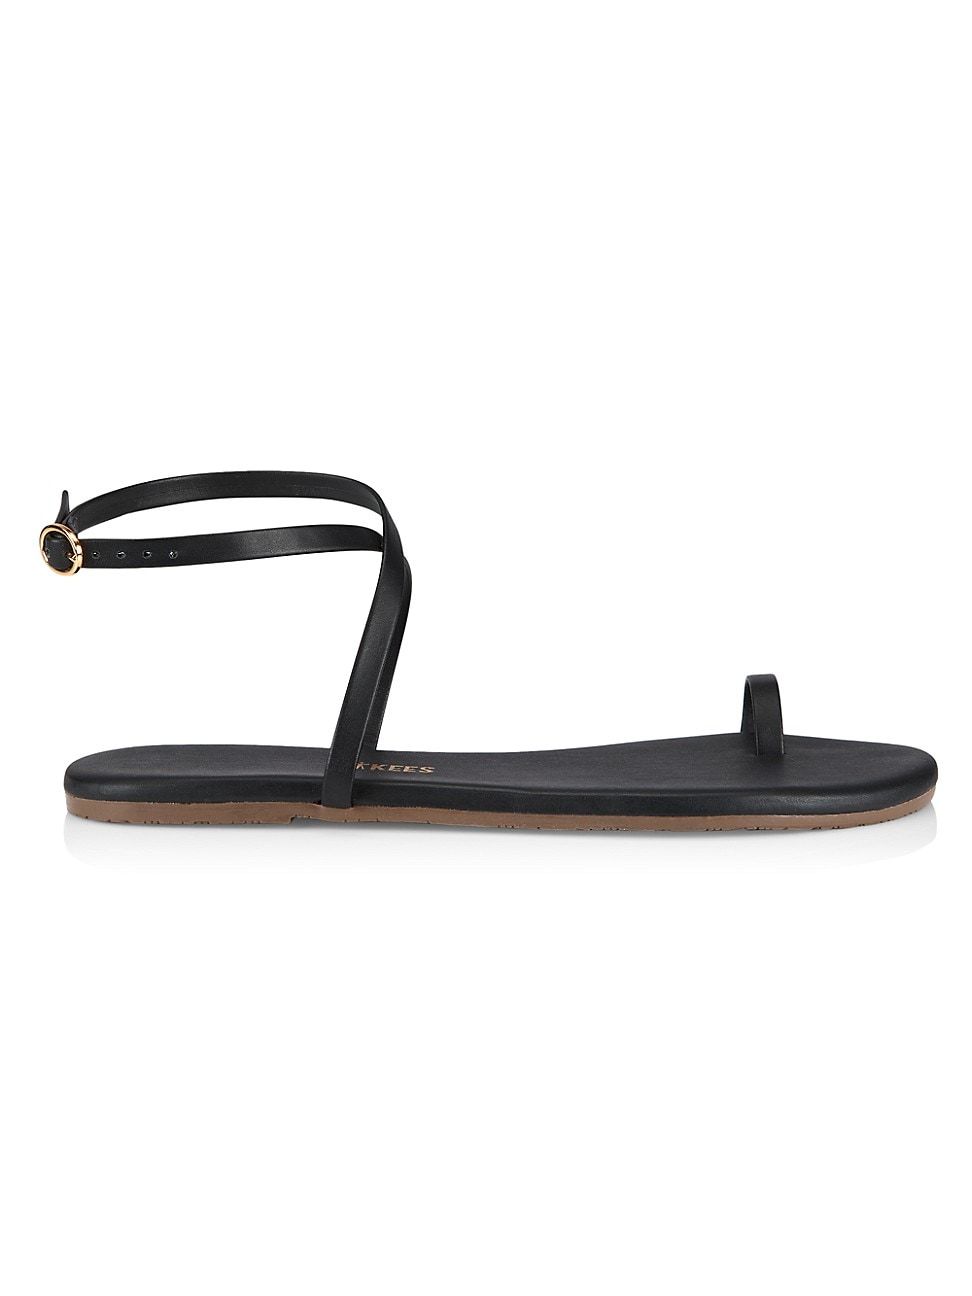 Women's Phoebe Leather Ankle-Strap Sandals - Black - Size 5 | Saks Fifth Avenue